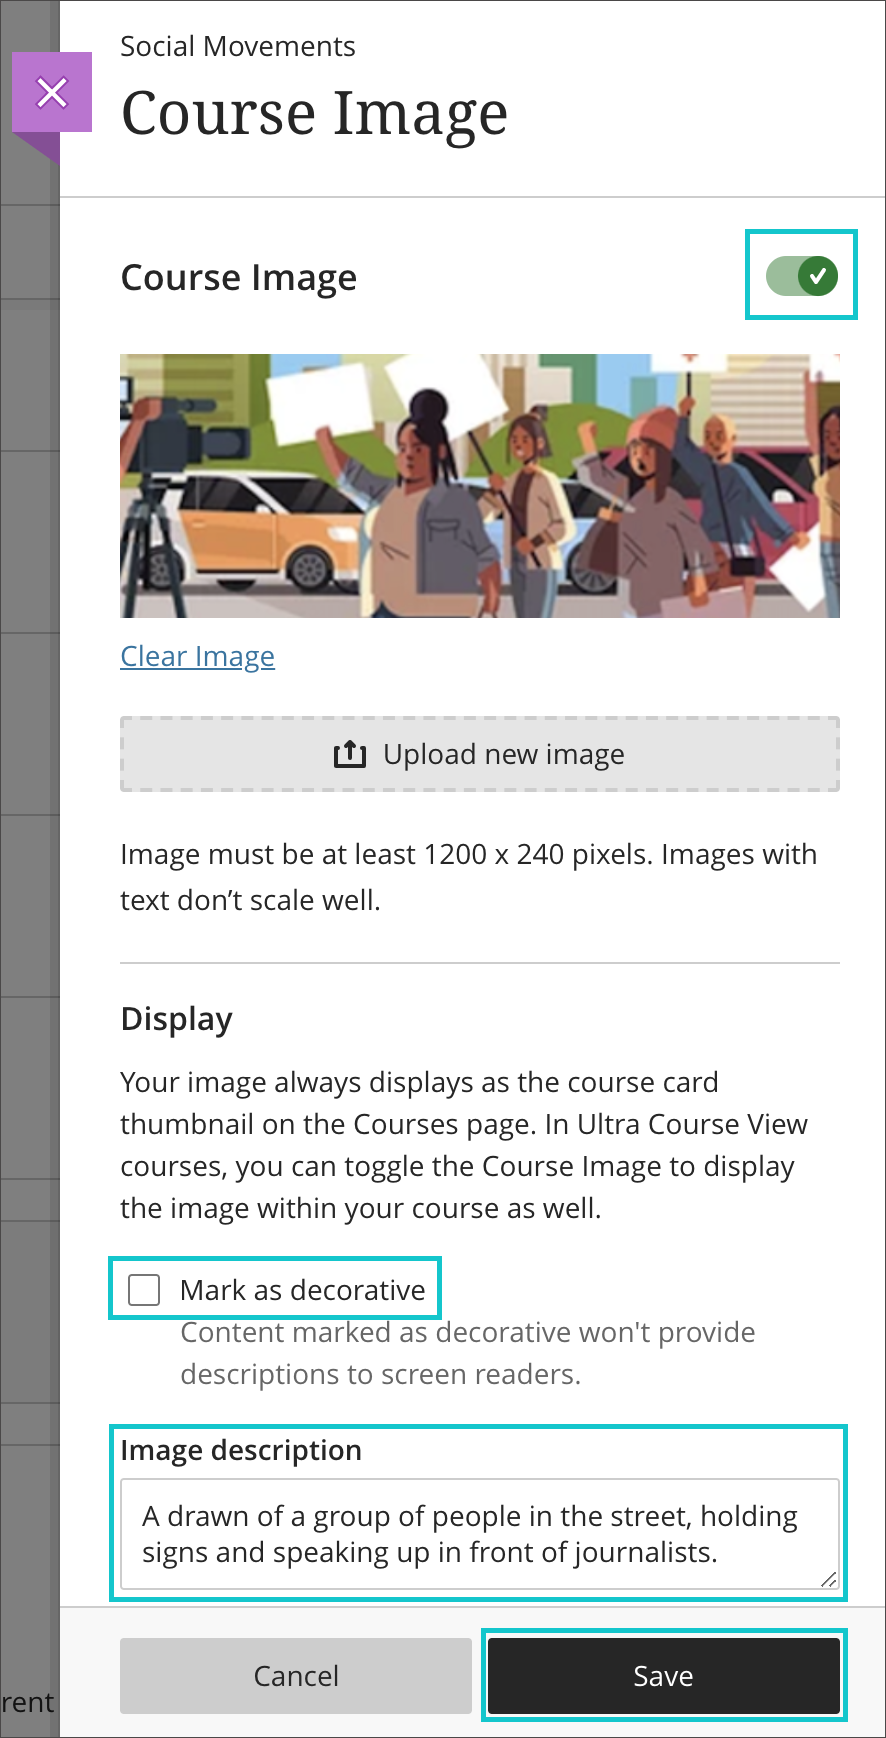 Select all final settings for the image to become a course banner and save it